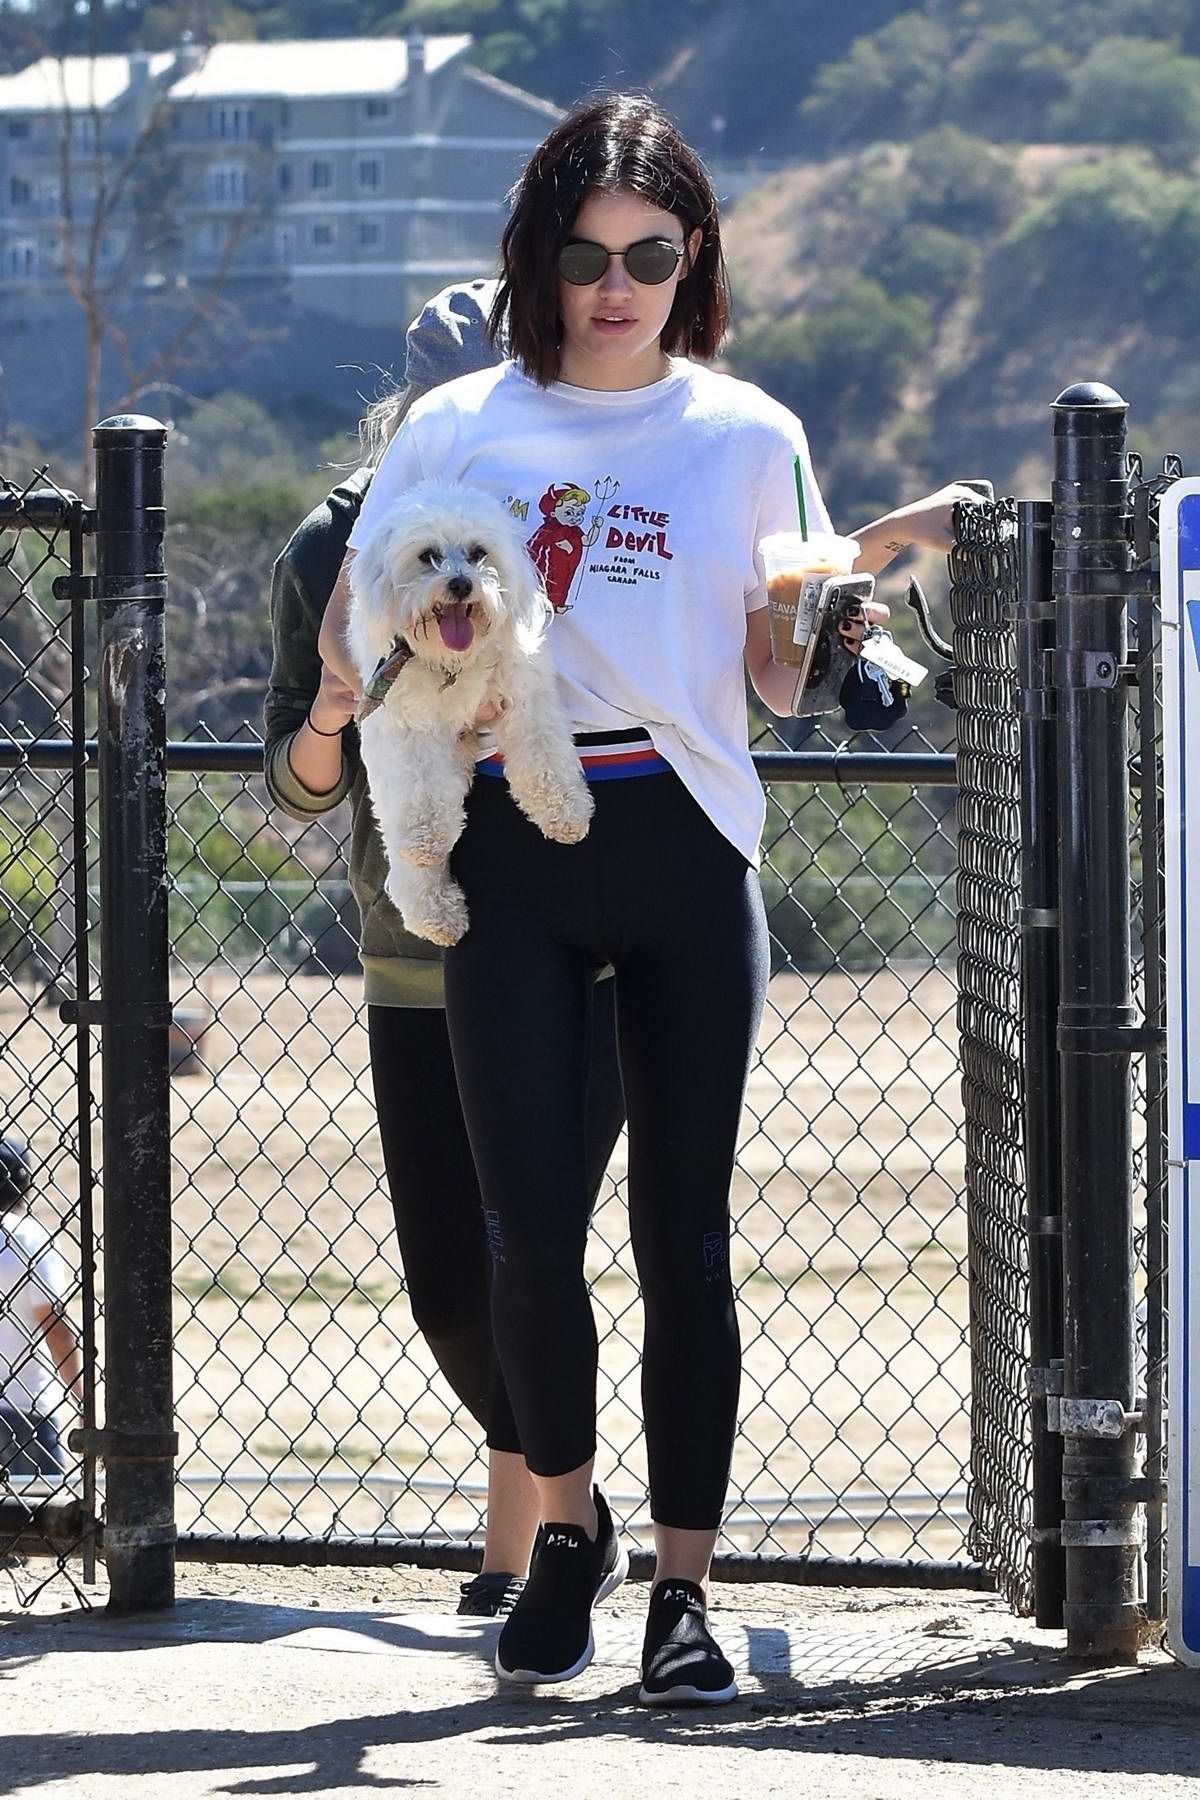 Lucy Hale enjoys her Sunday morning with her pup at a dog park in Los